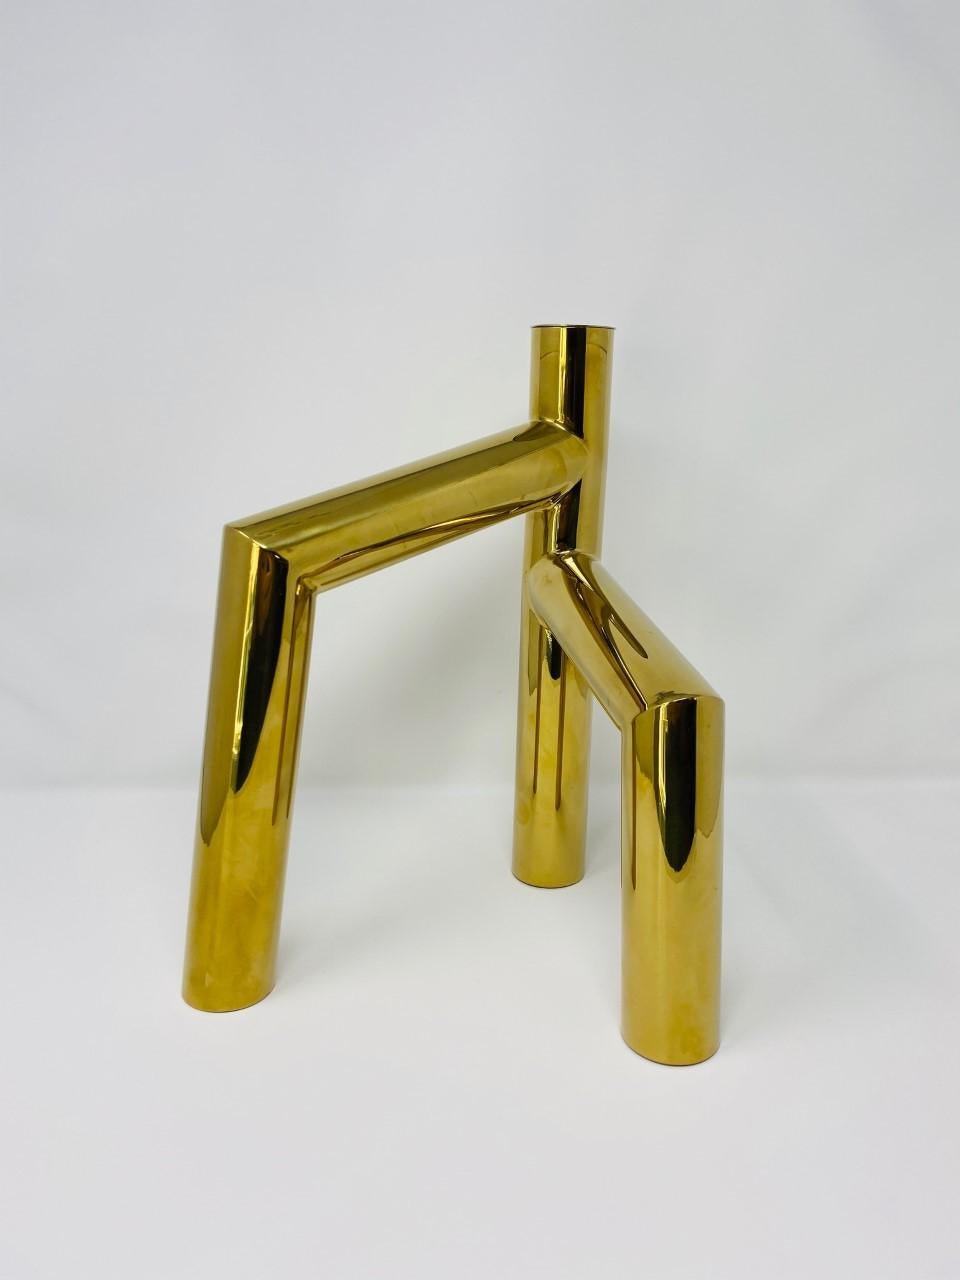 Beautifully sculptural candleholder by Zanini de Zanine. Regarded as one of the most renowned forces in art and design, Zanini de Zanine creates pieces that bring a strong presence in design. This candleholder is a luxurious and sophisticated